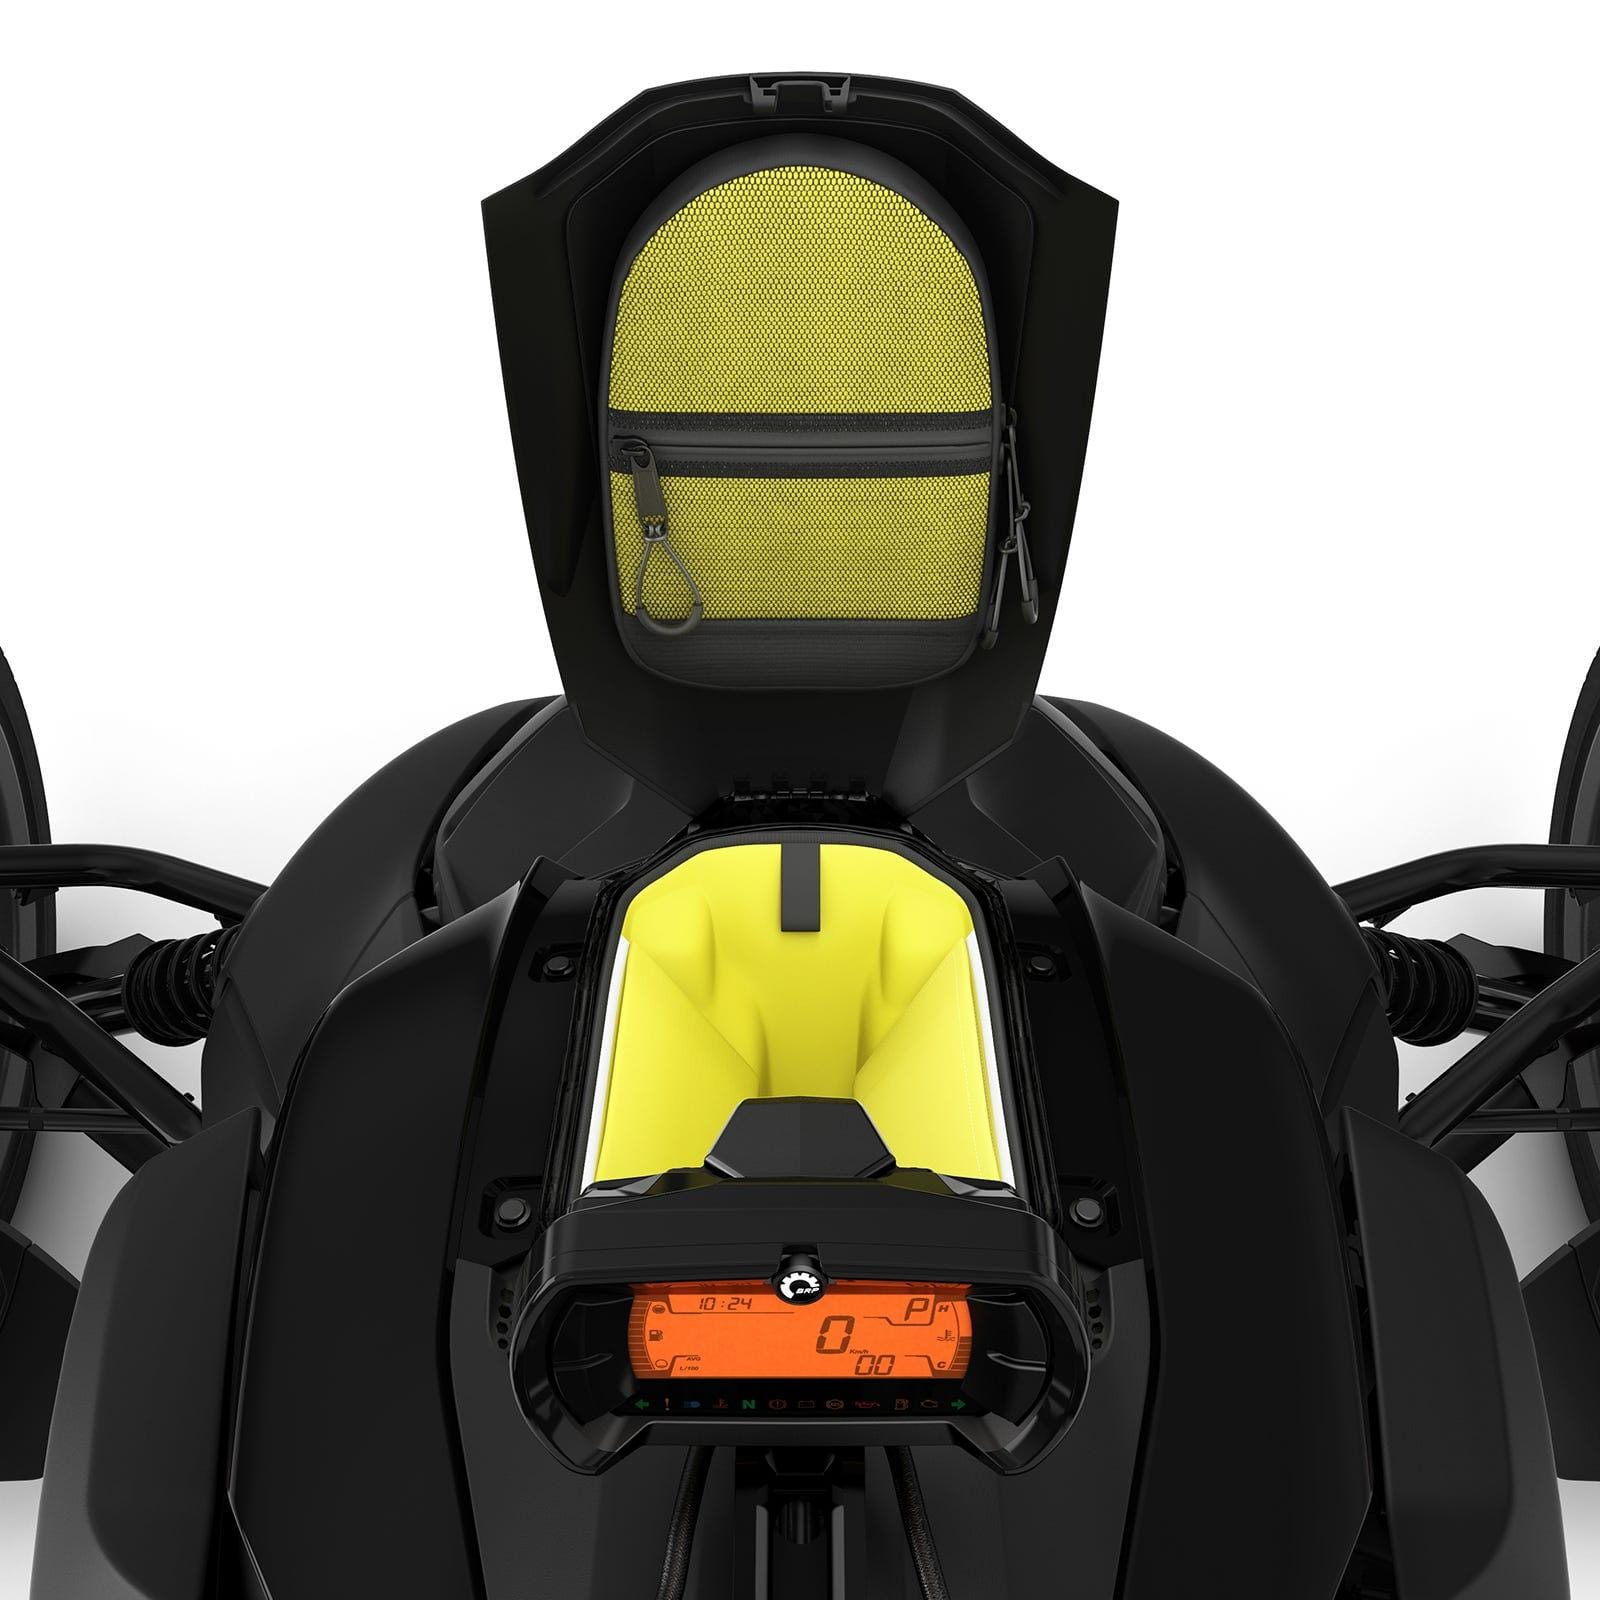 Shop Can-Am Spyder LinQ, Bags, Cargo & Storage at